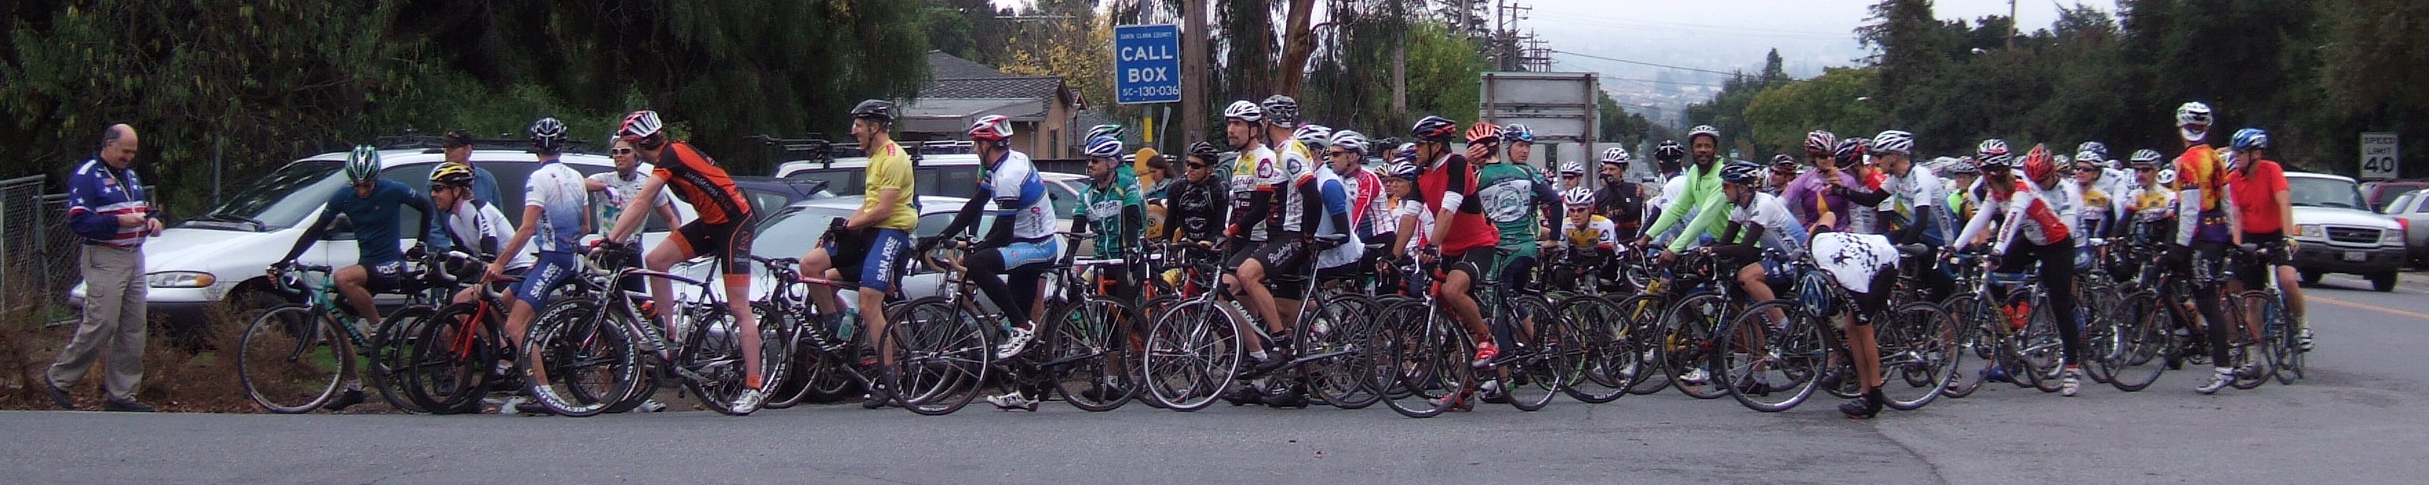 Getting ready to start at the base of Mt. Hamilton Rd.